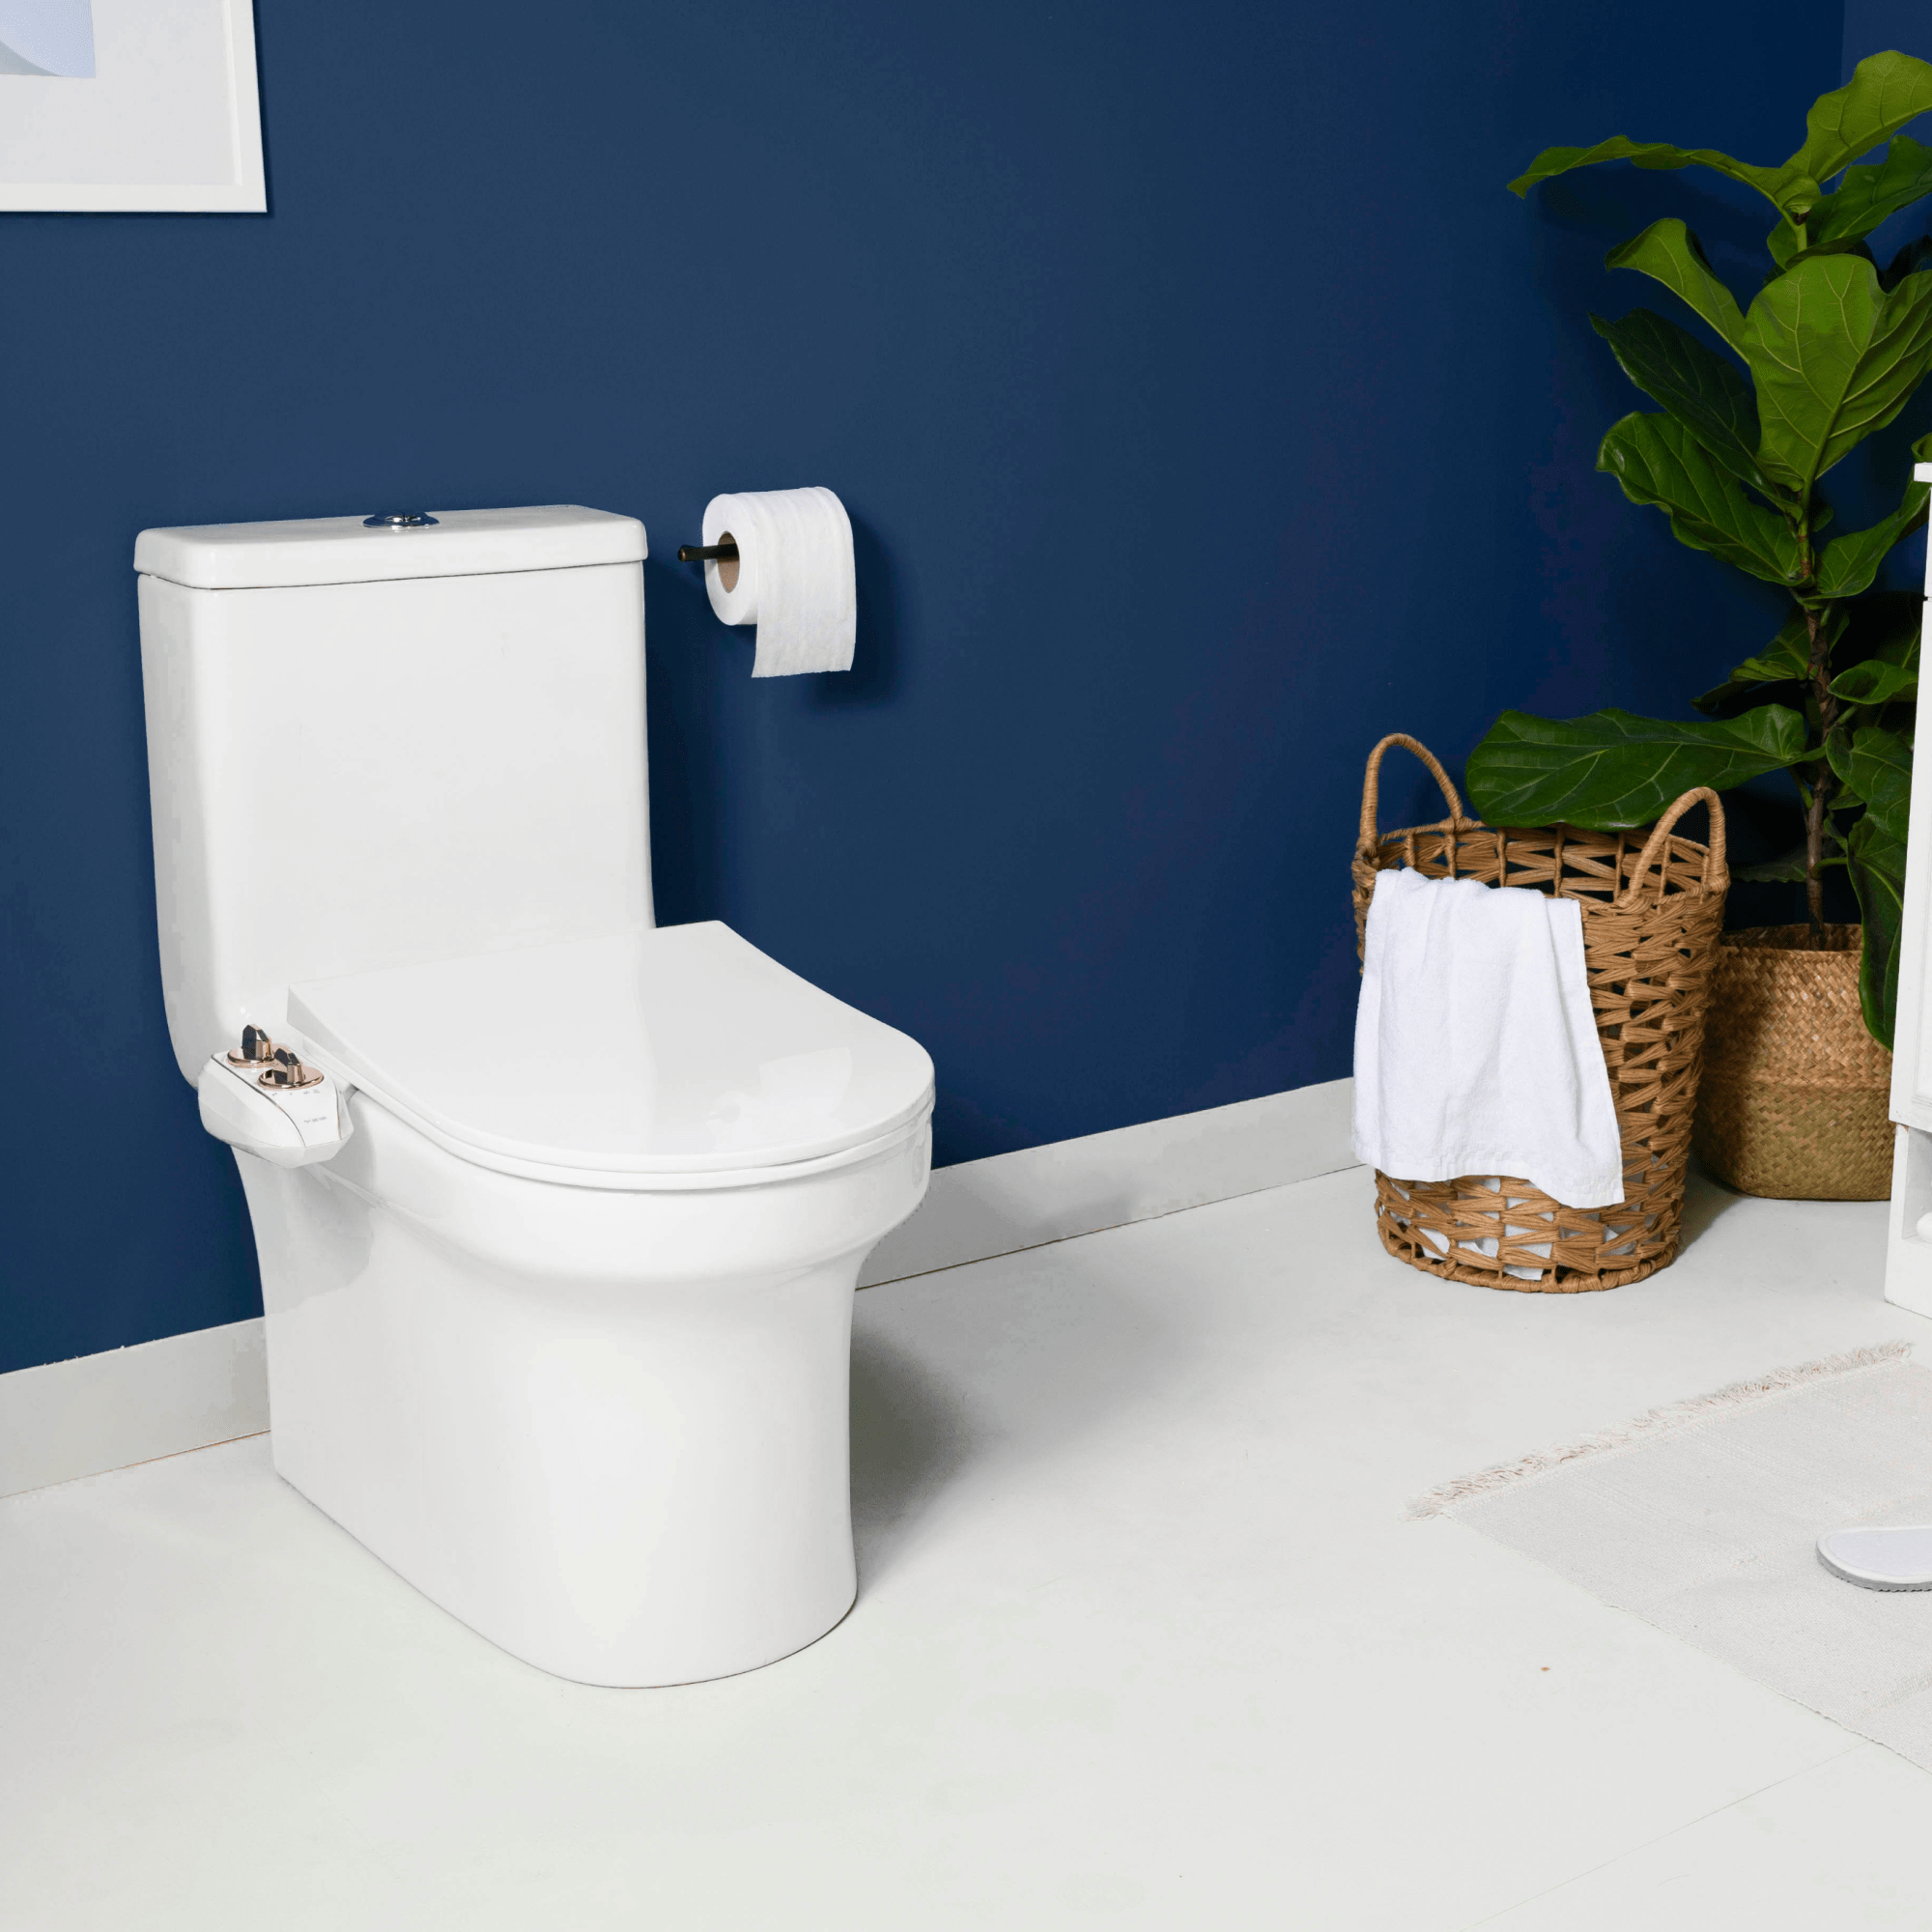 NEO 185 Plus Rose Gold installed on a toilet, in a modern blue bathroom with a plant and basket of towels